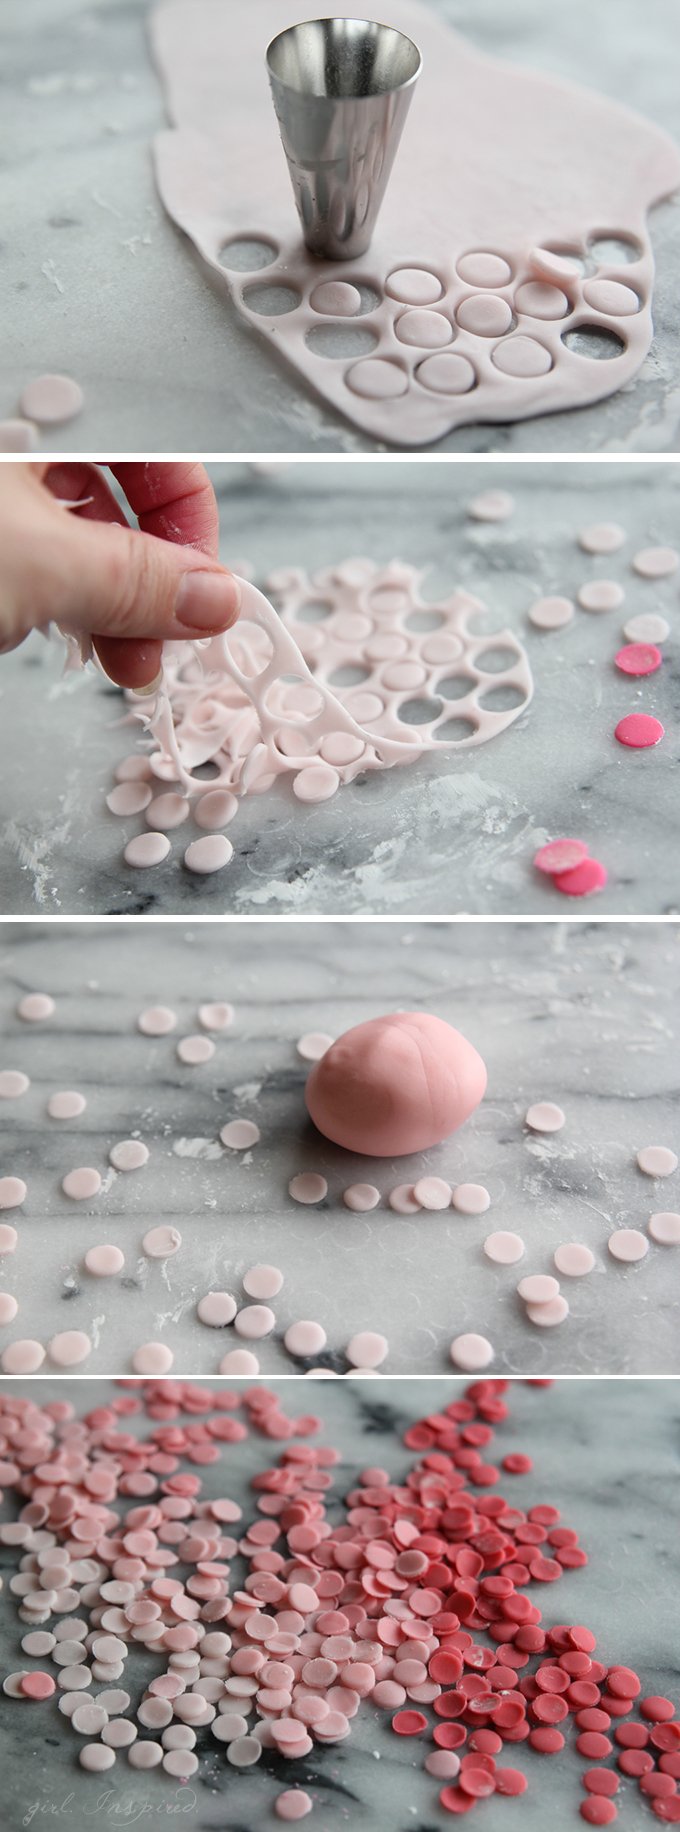 Confetti Cake - make your own edible confetti to decorate home-made or store-bought cakes! Simple and so pretty!